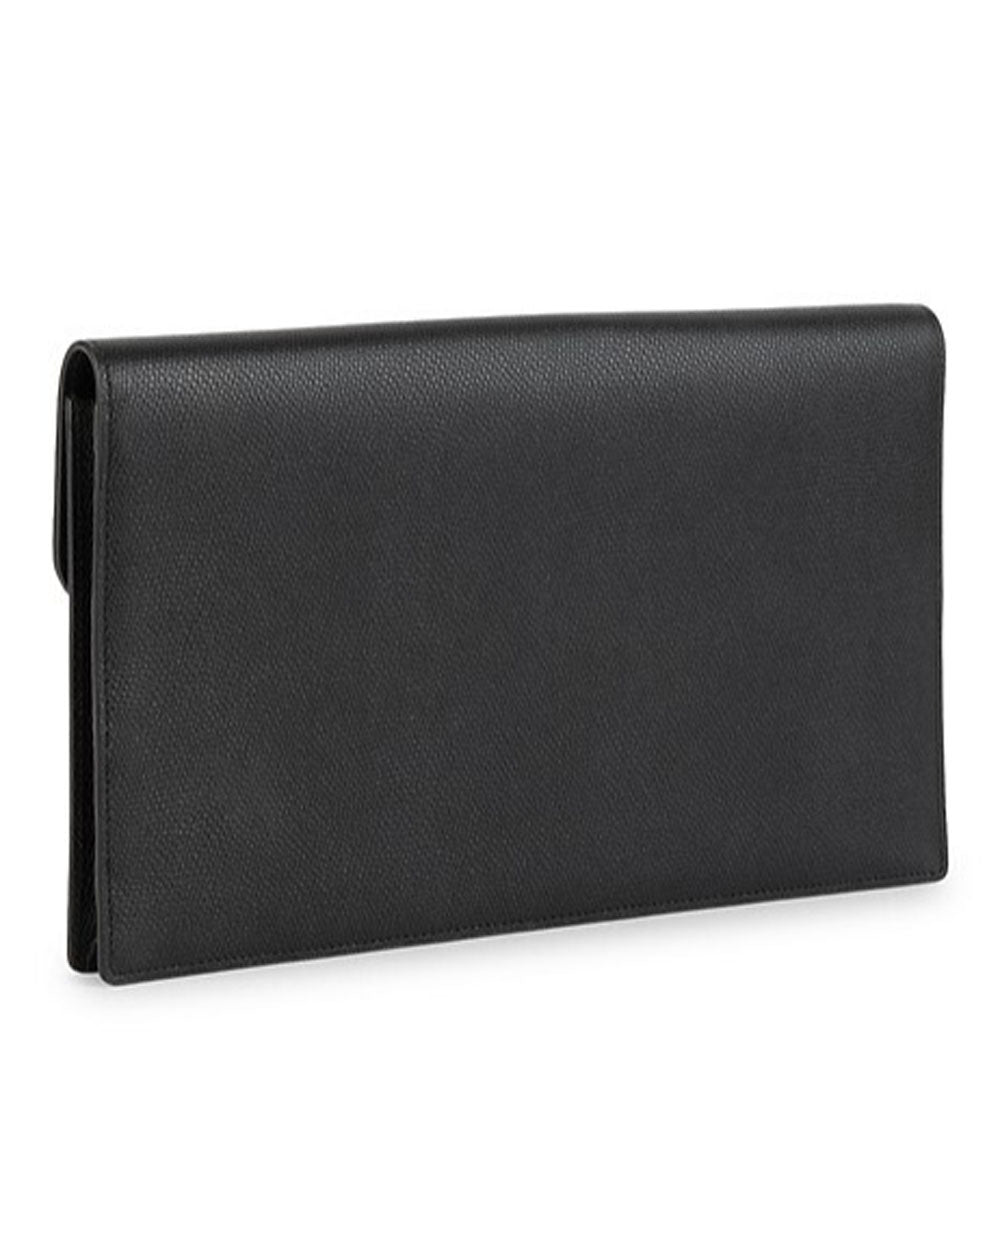 Black Large VSling Leather Pouch